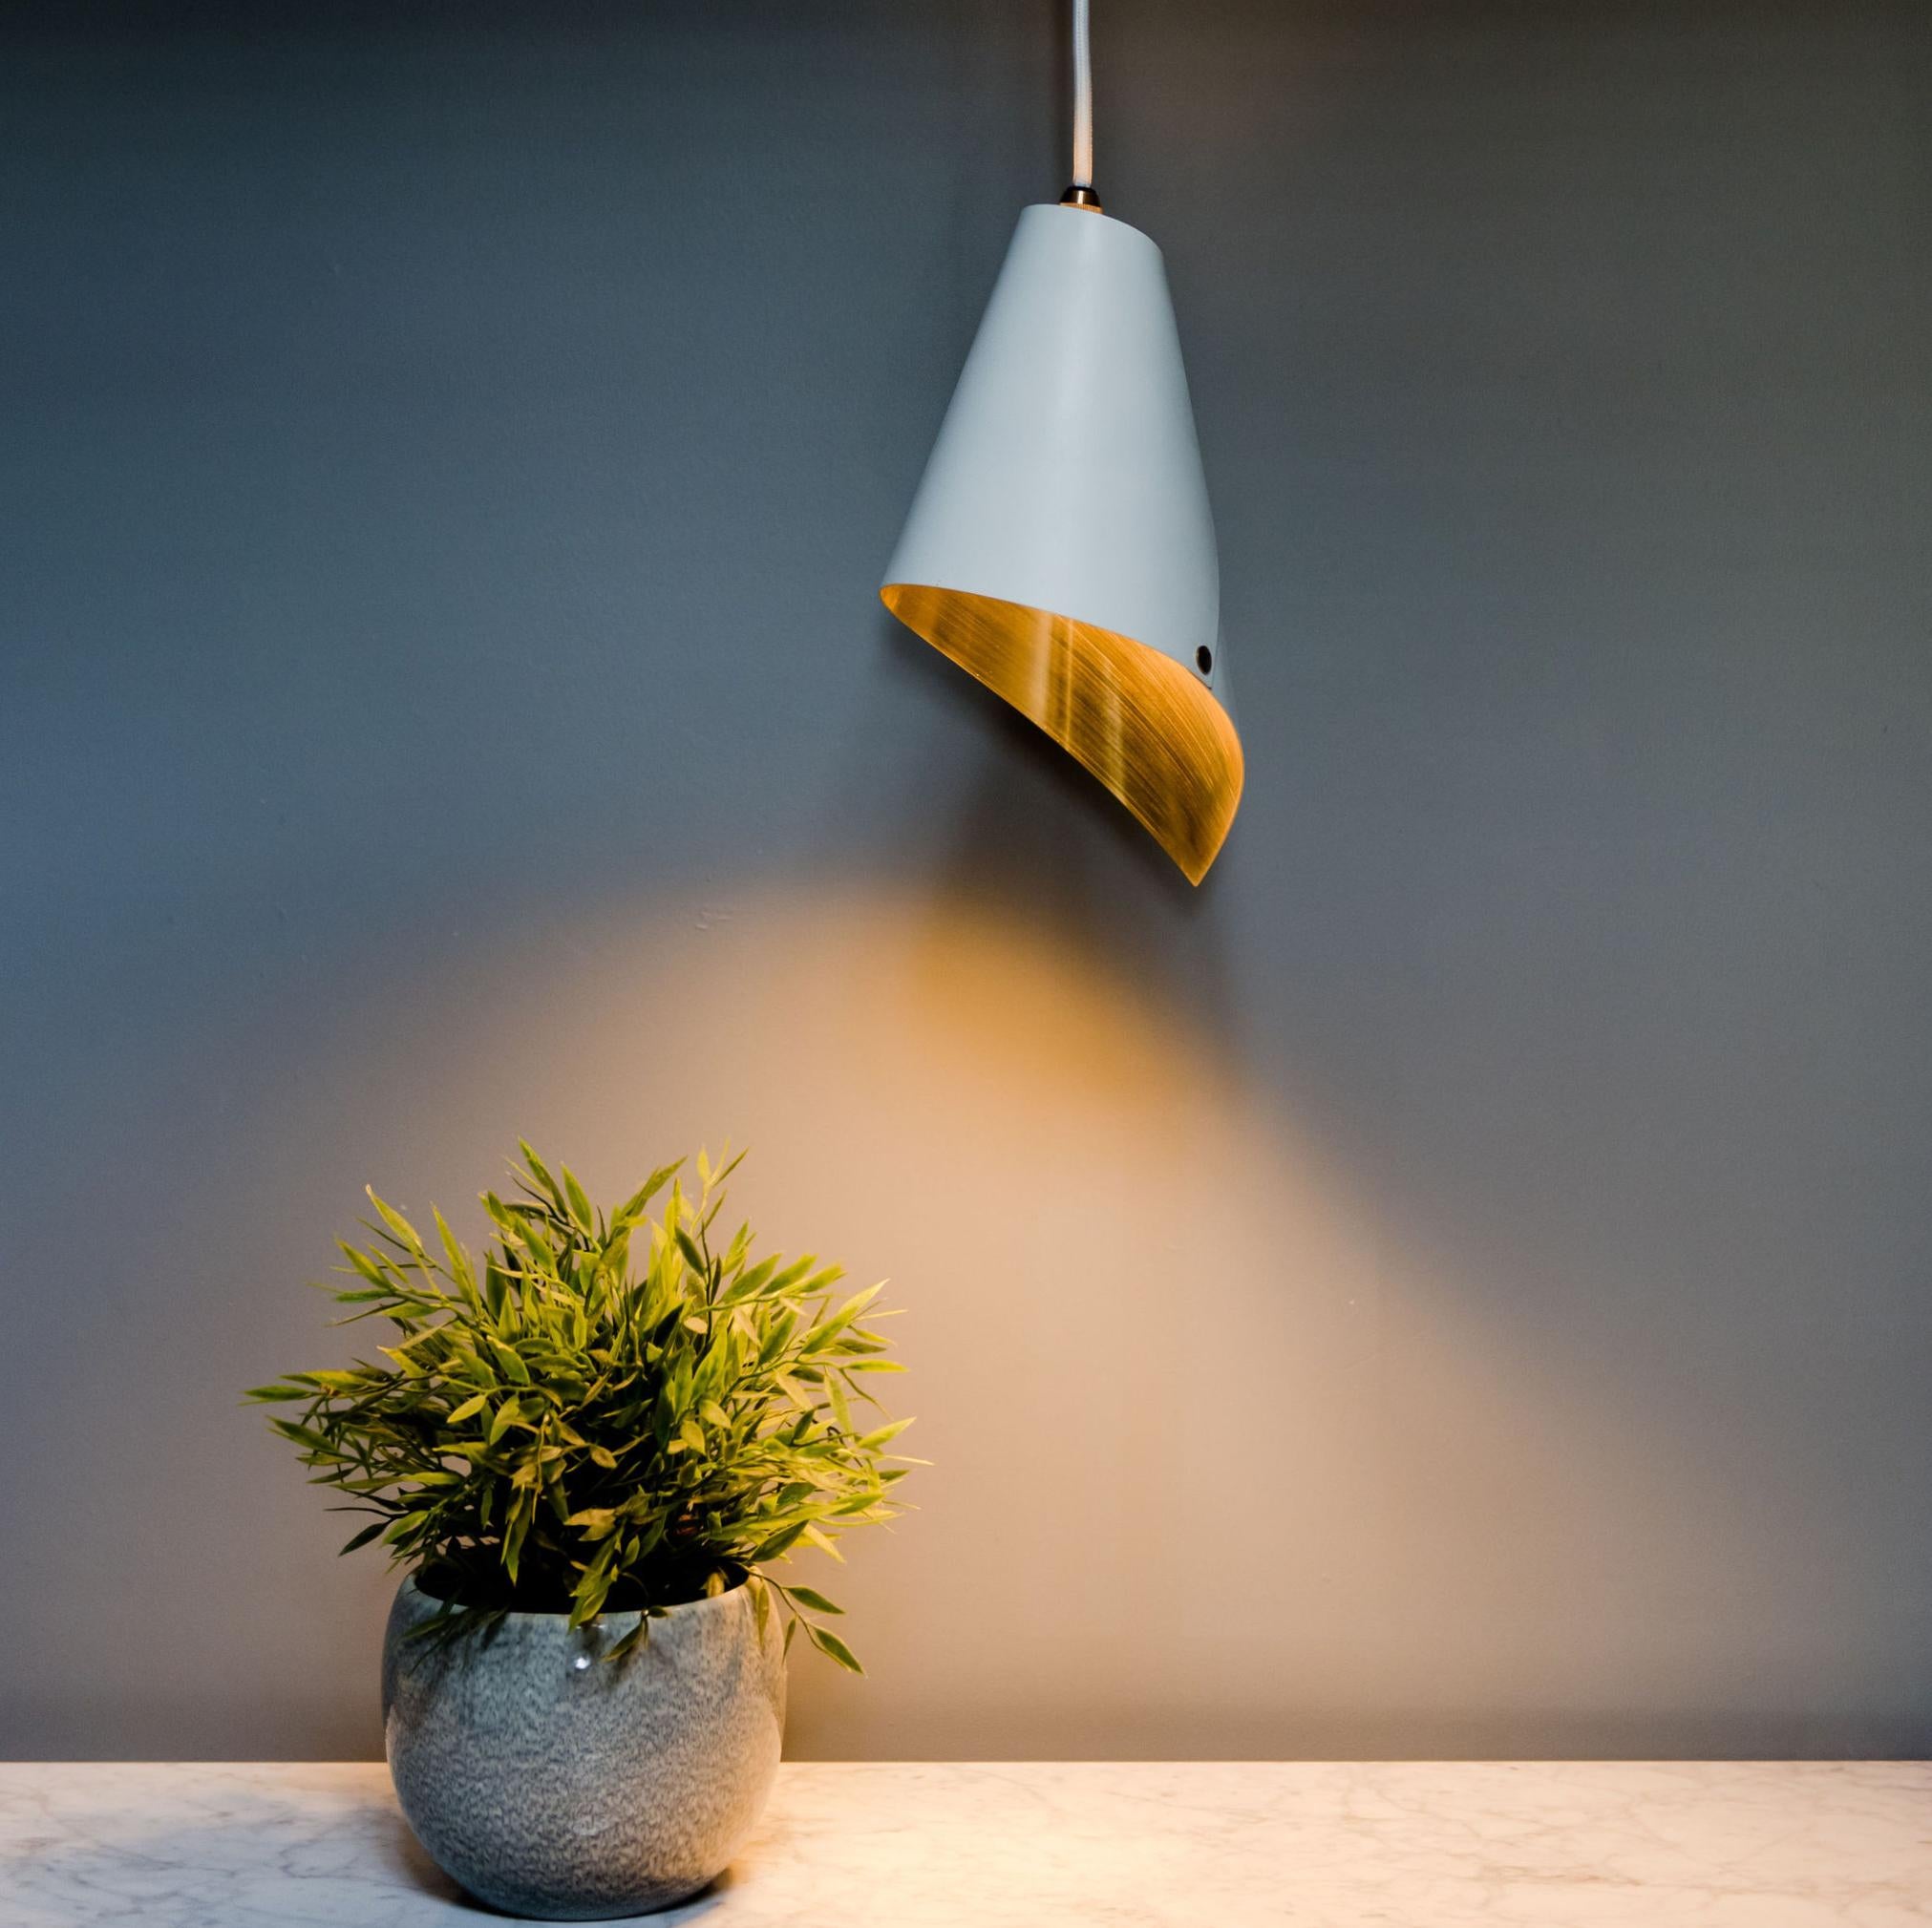 ARC Asymmetric Modern Pendant Light in White and Brushed Brass In New Condition For Sale In London, GB